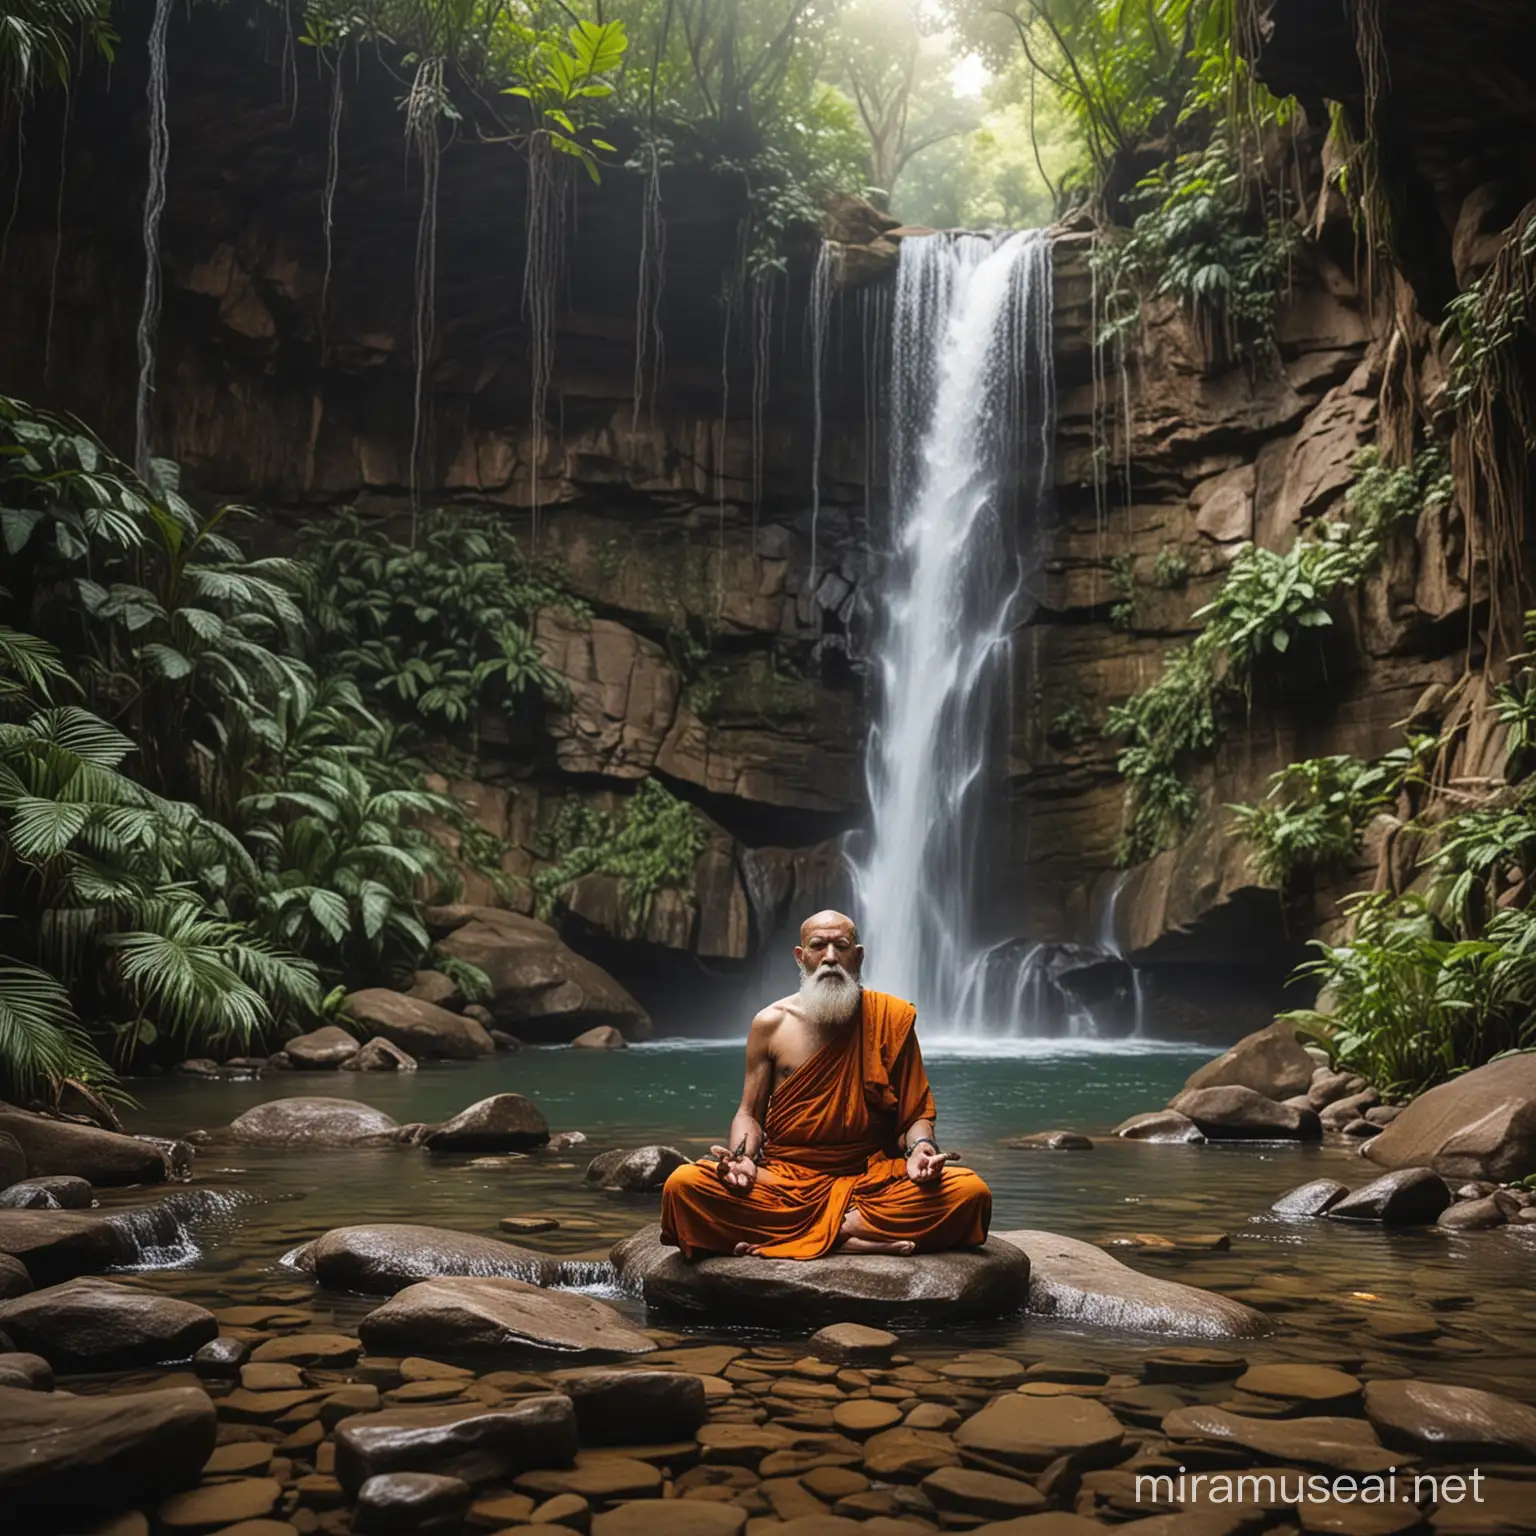 In ancient jungle, an old monk with chakra meditating in a waterfall